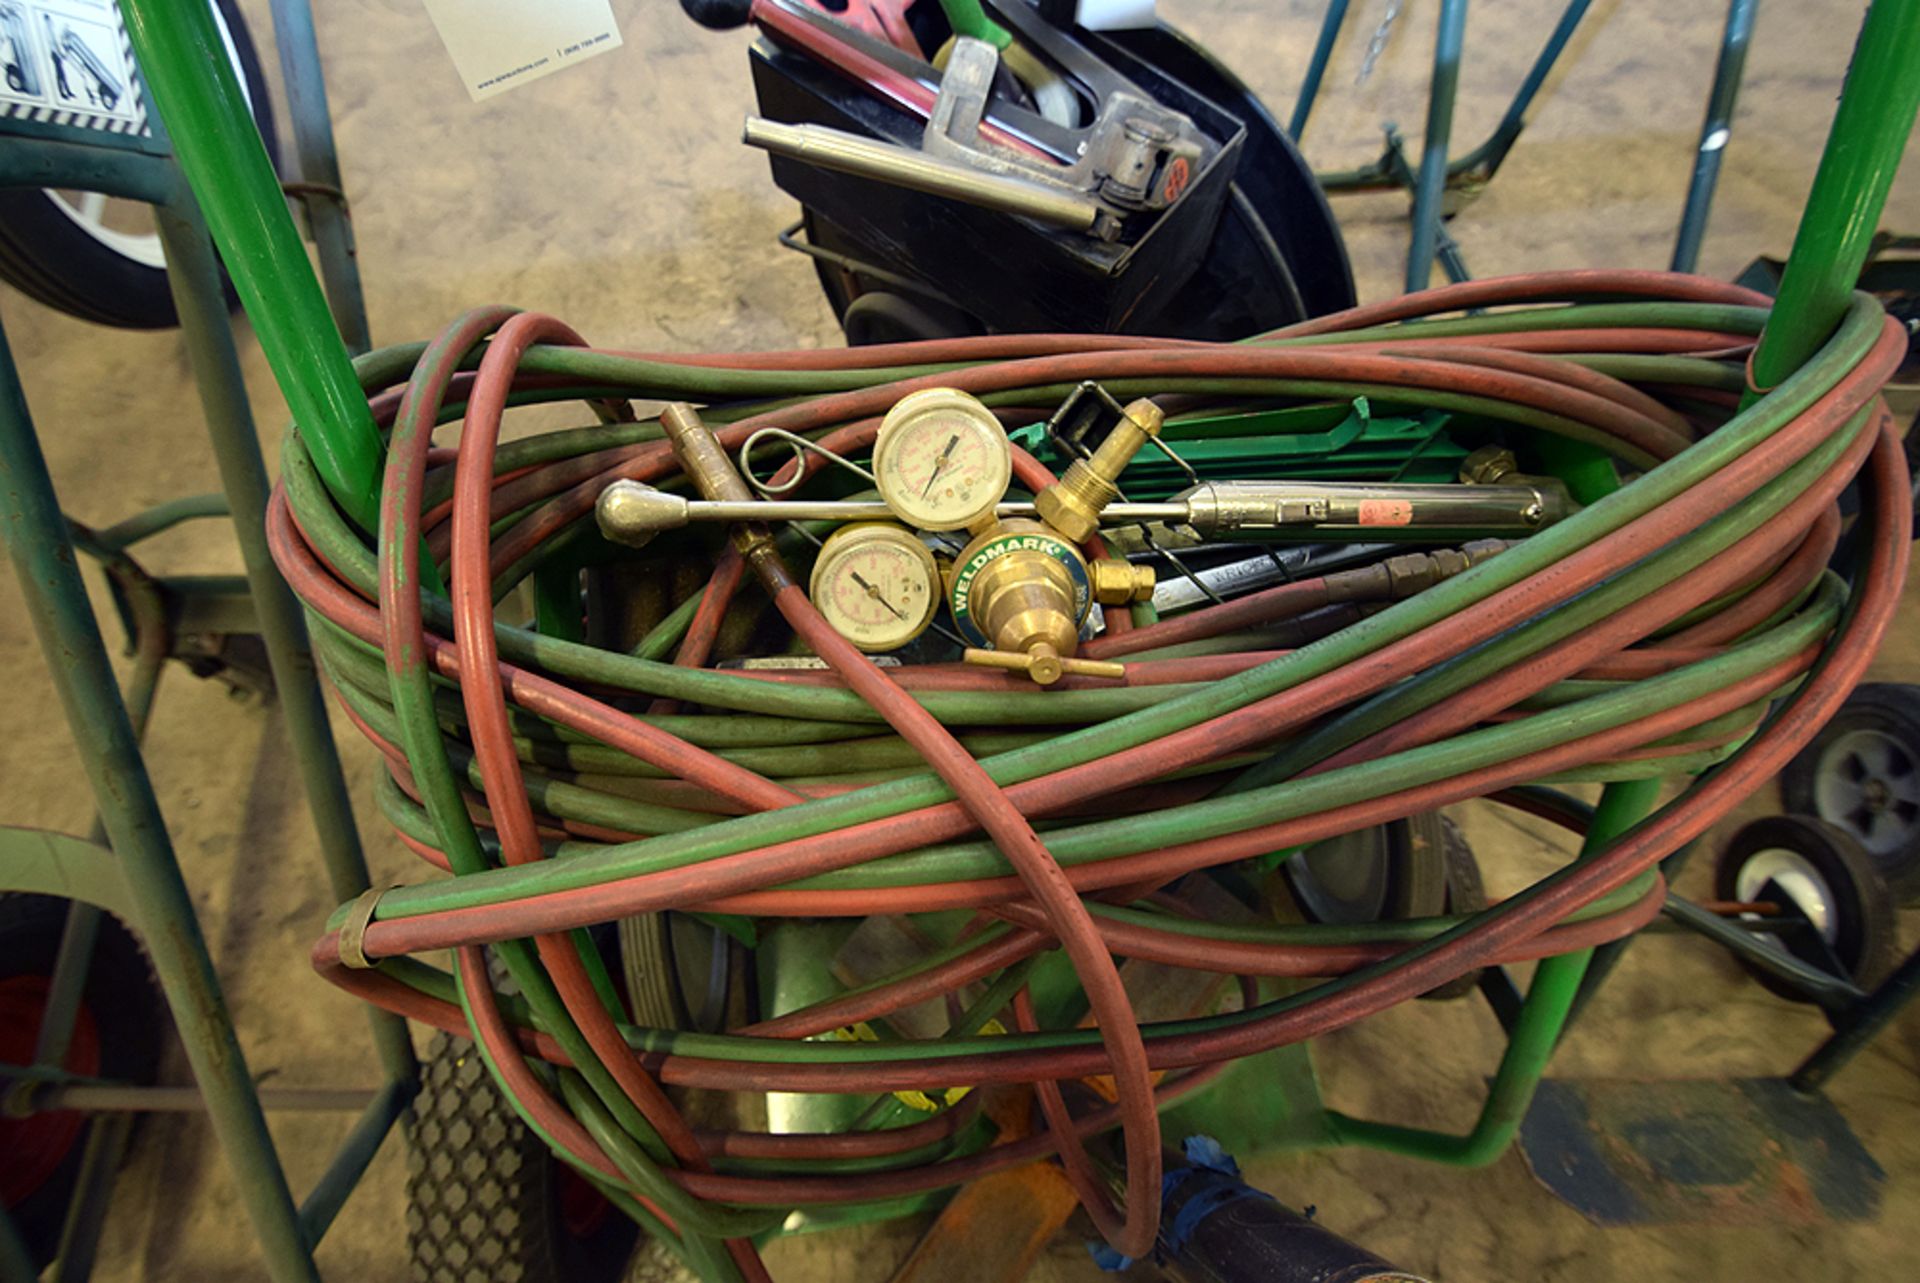 Acetylene Hose, Torch and Cart Set - Image 2 of 2